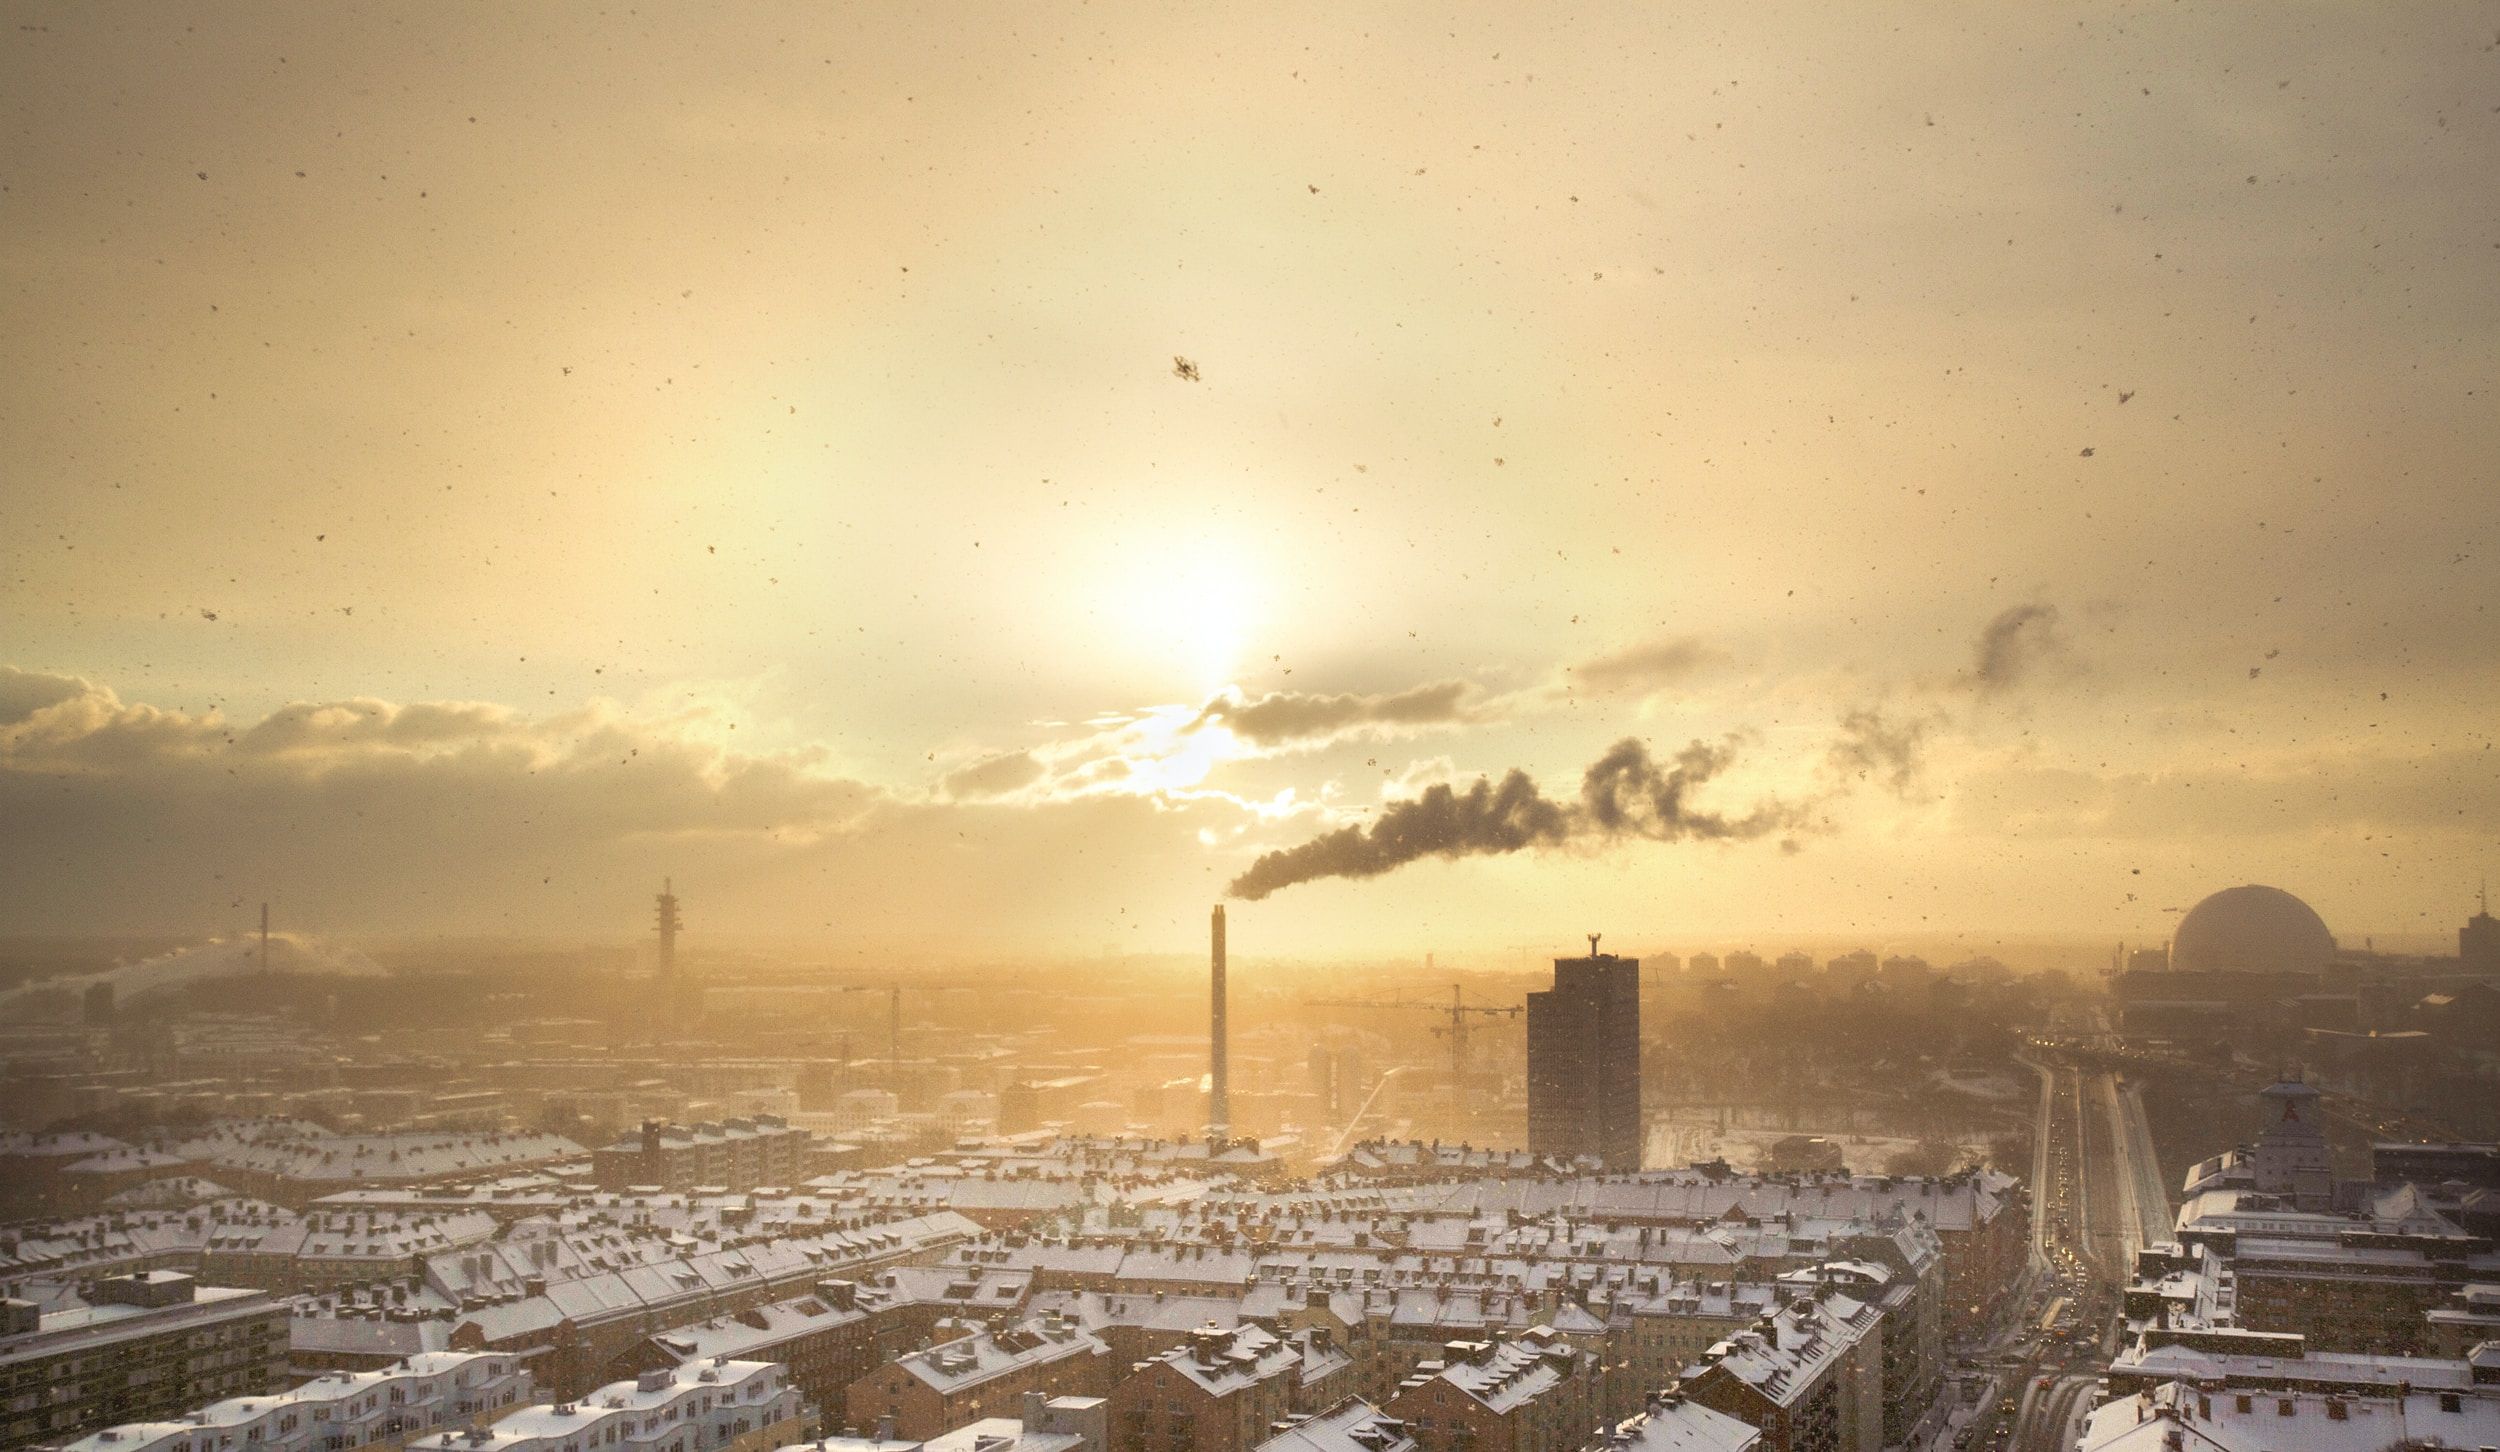 Air Pollution Picture. Download Free Image